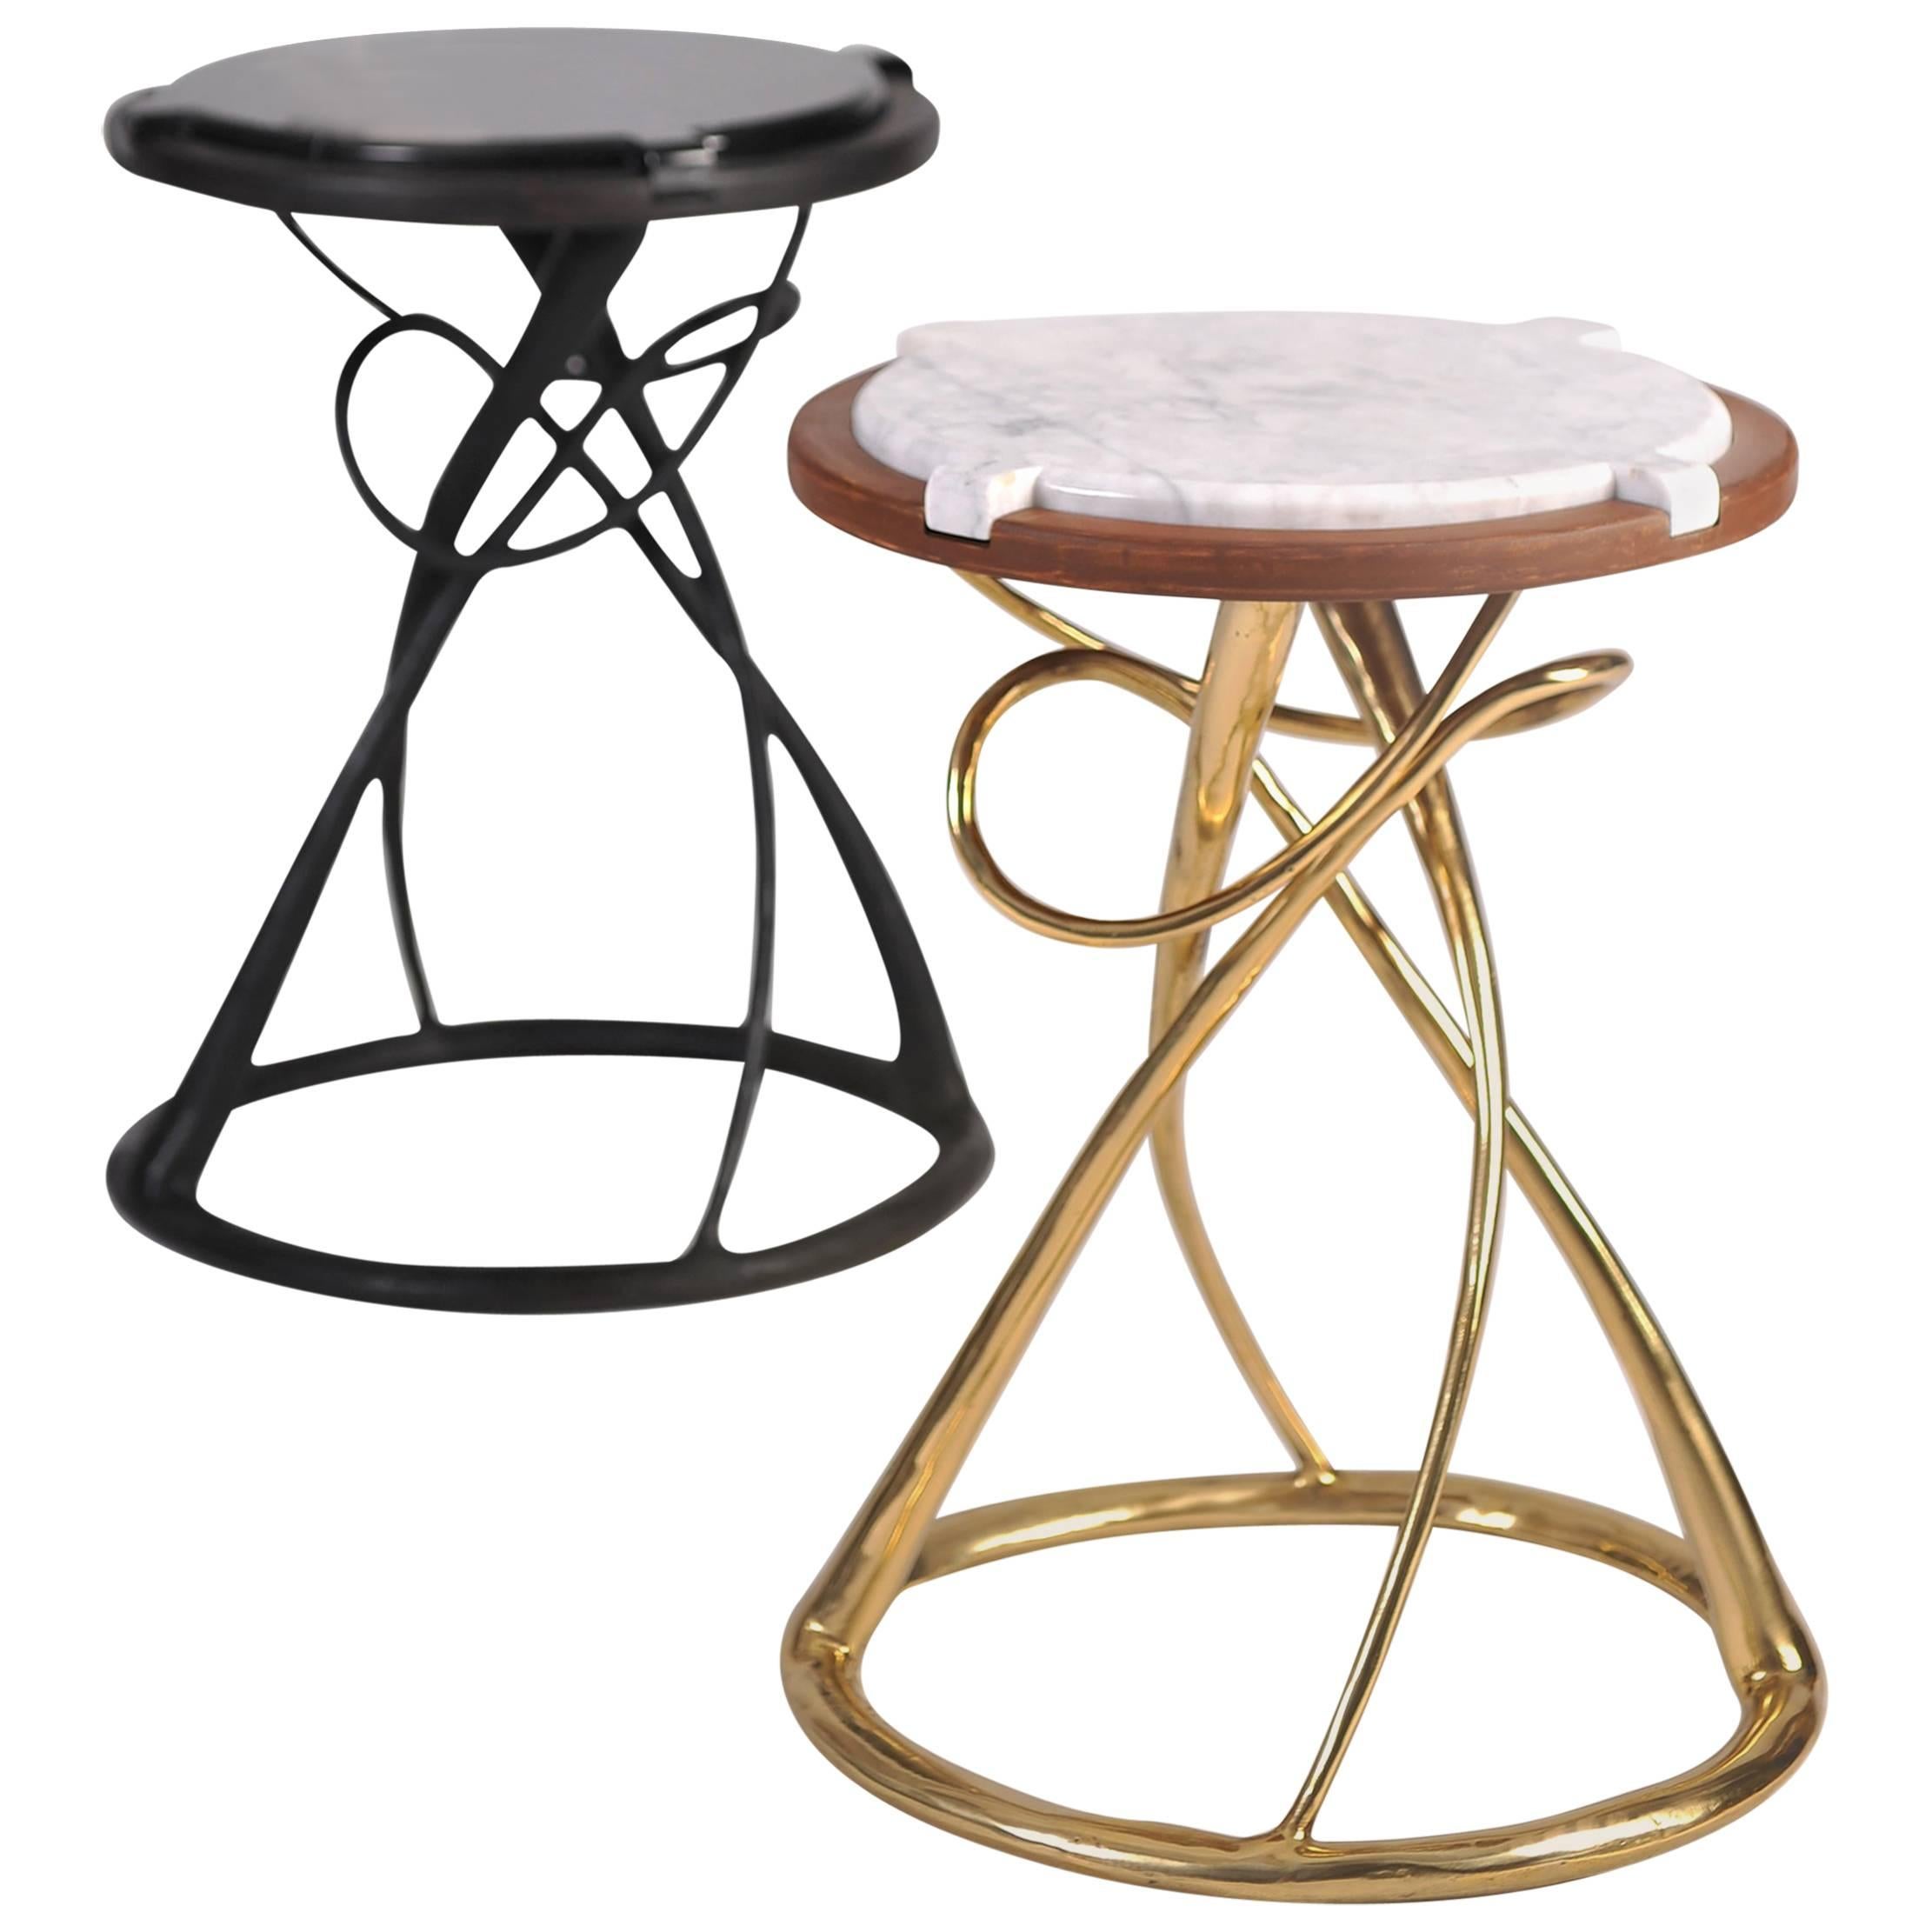 Pair of Brass Side Tables, Hourglass, Misaya